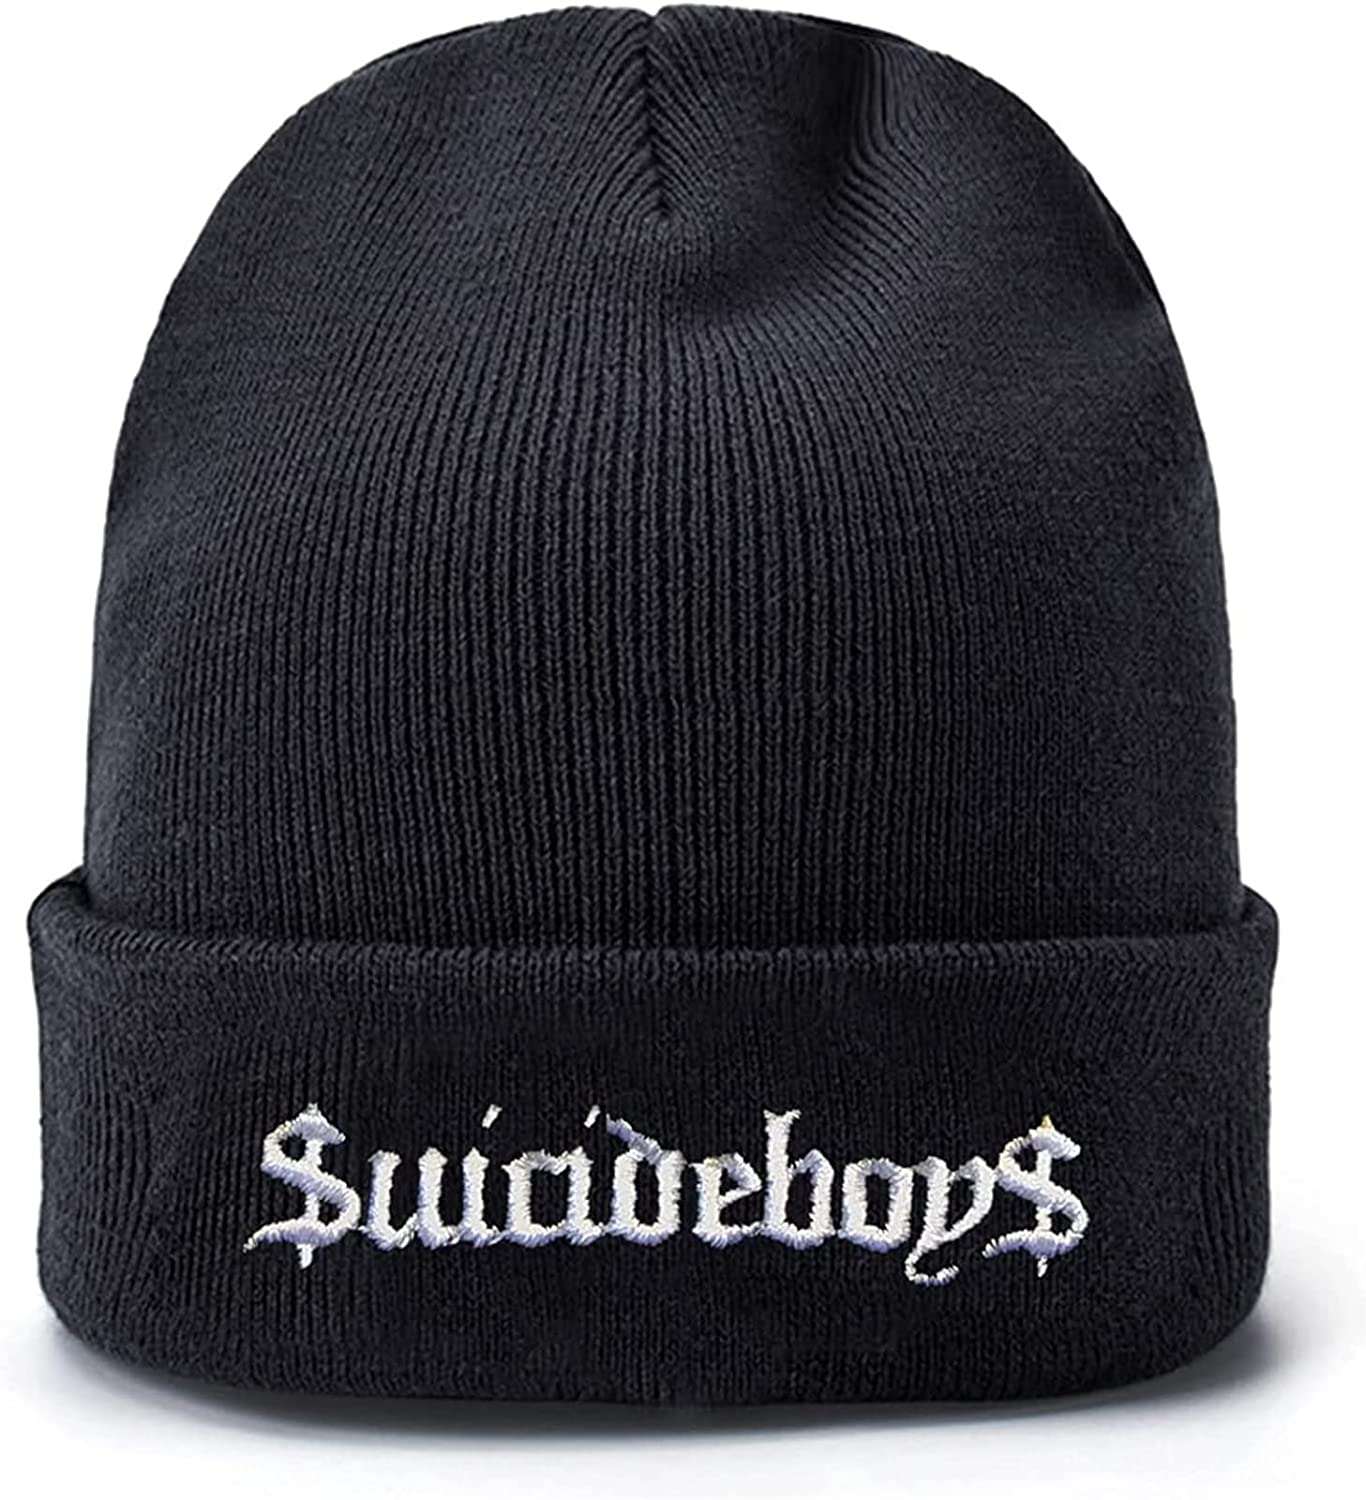 gogoherhome Suicide Cold for Toboggan Logo Embroidered Men Cap Hats Knit Boys Black for Stretchy Weather Soft Warm Beanie Women